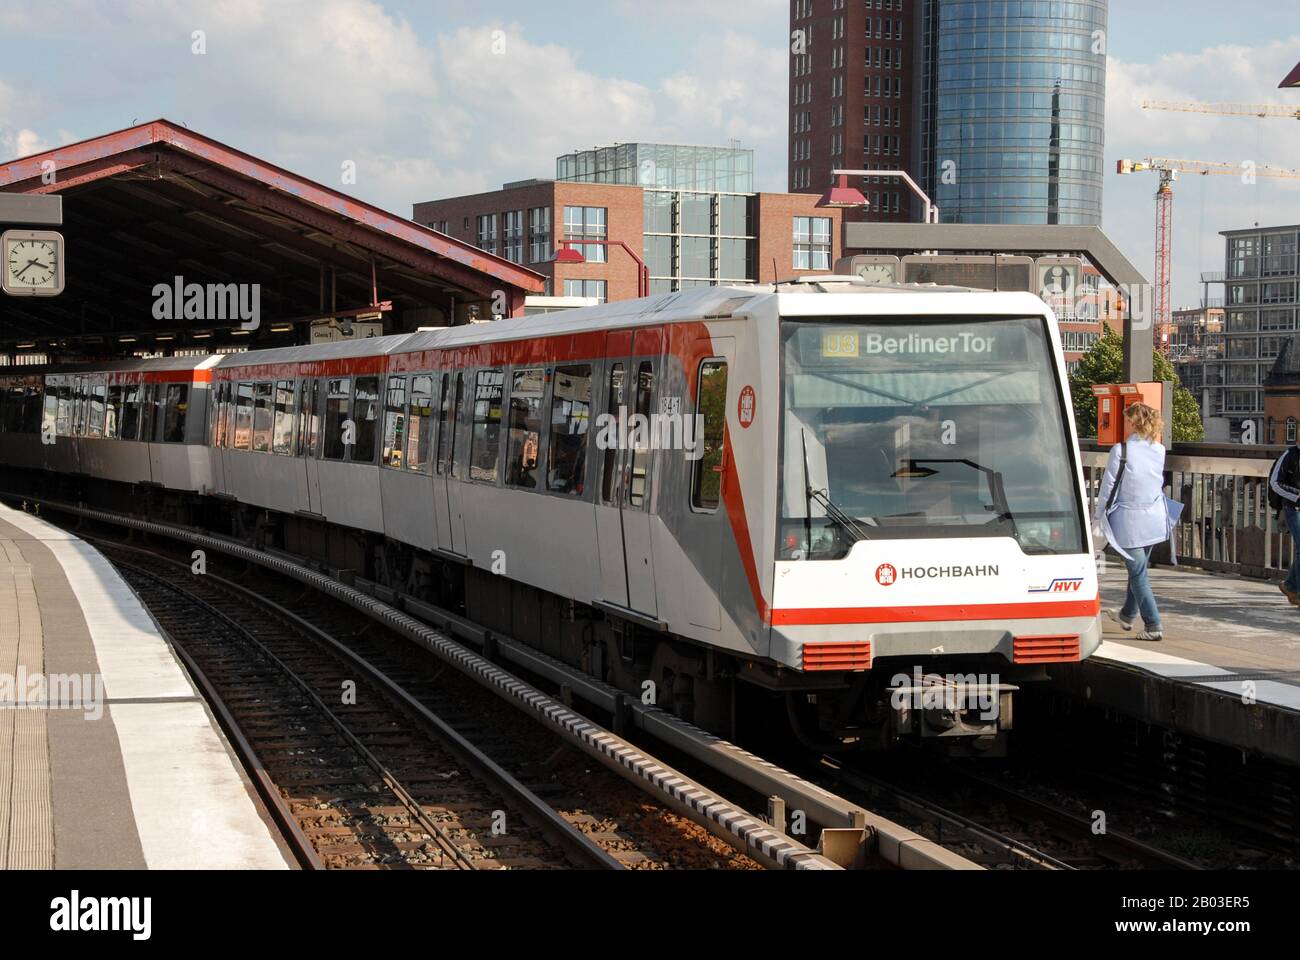 A local suburbia train, the Hamburger Hochbahn,part of the U-Bahn rail  network, arriving at one of the stations at the Port of Hamburg in Germany  Stock Photo - Alamy